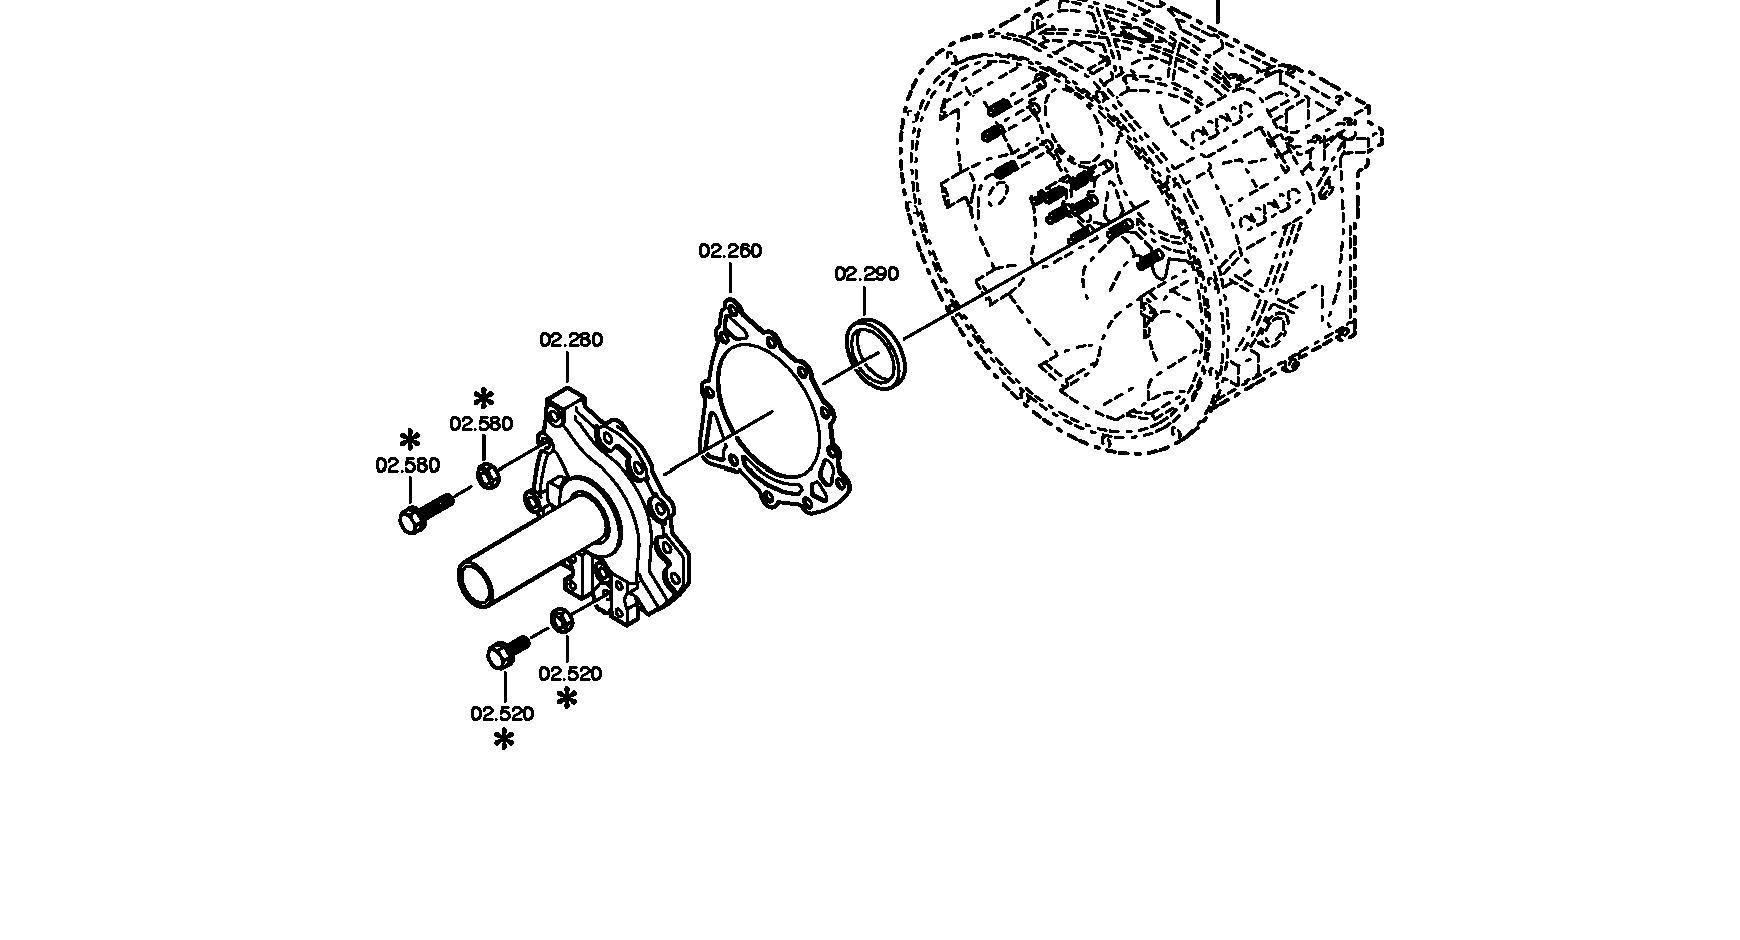 drawing for DAF 1295188 - CONNECTION PLATE (figure 1)